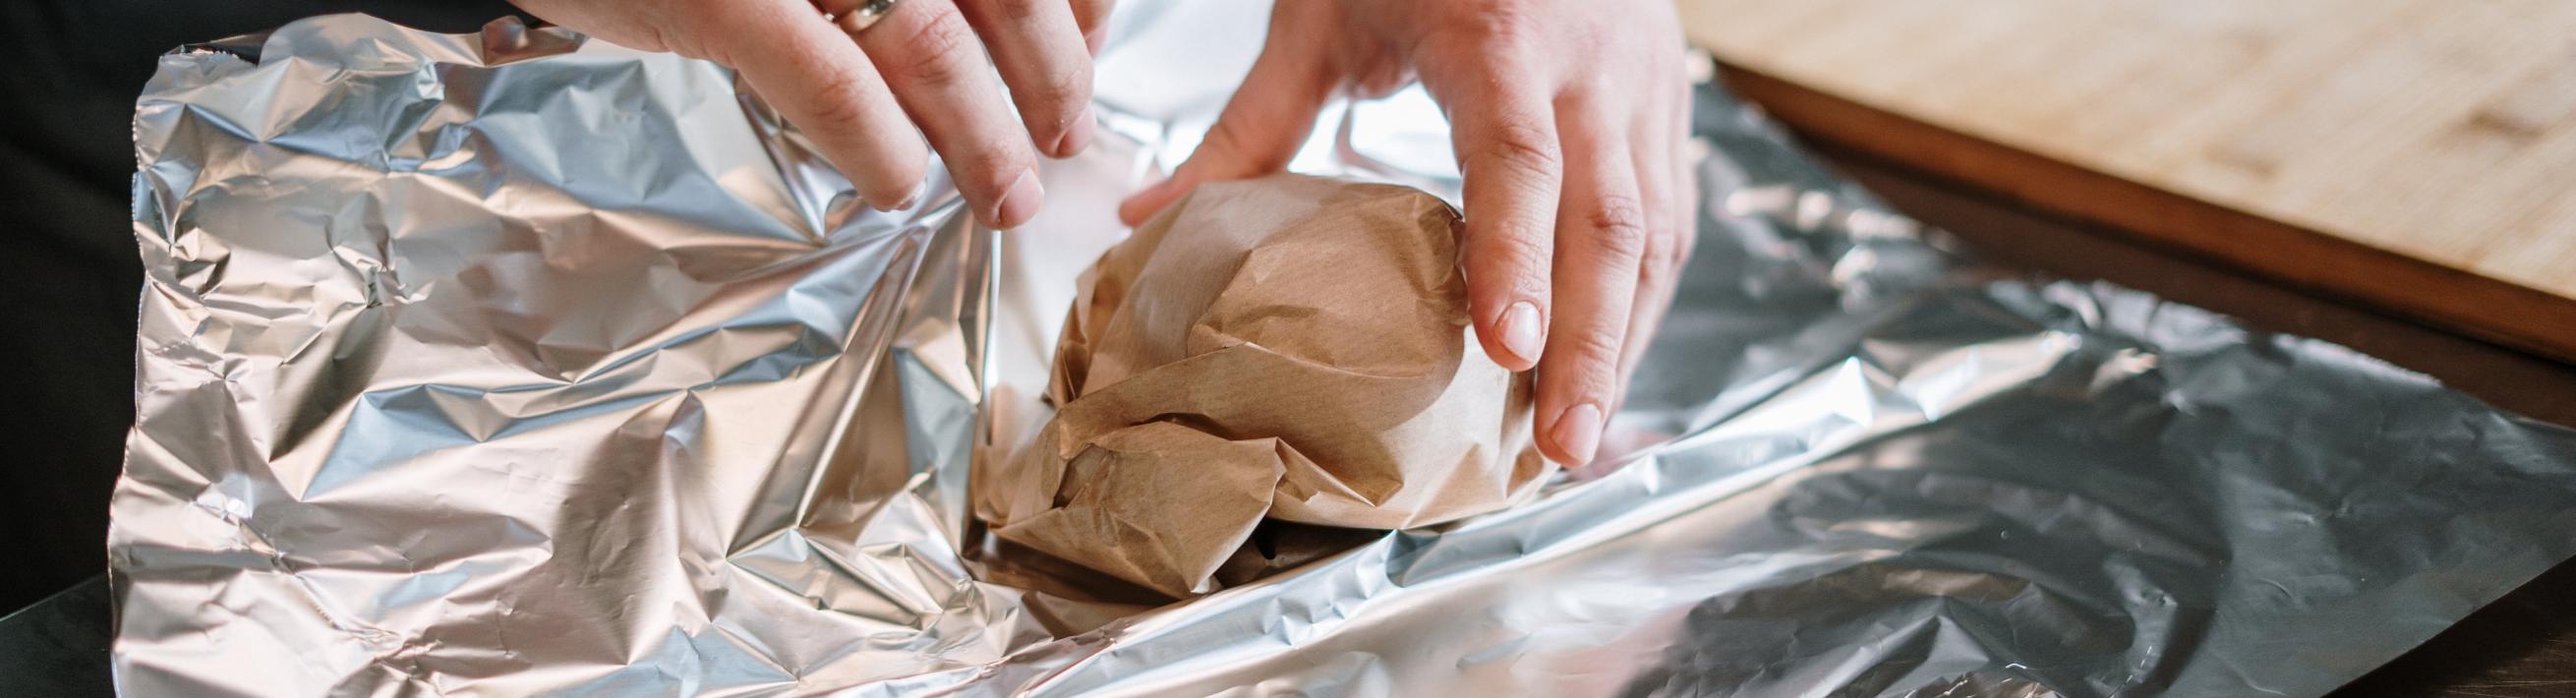 A person wrapping food in paper and foil.